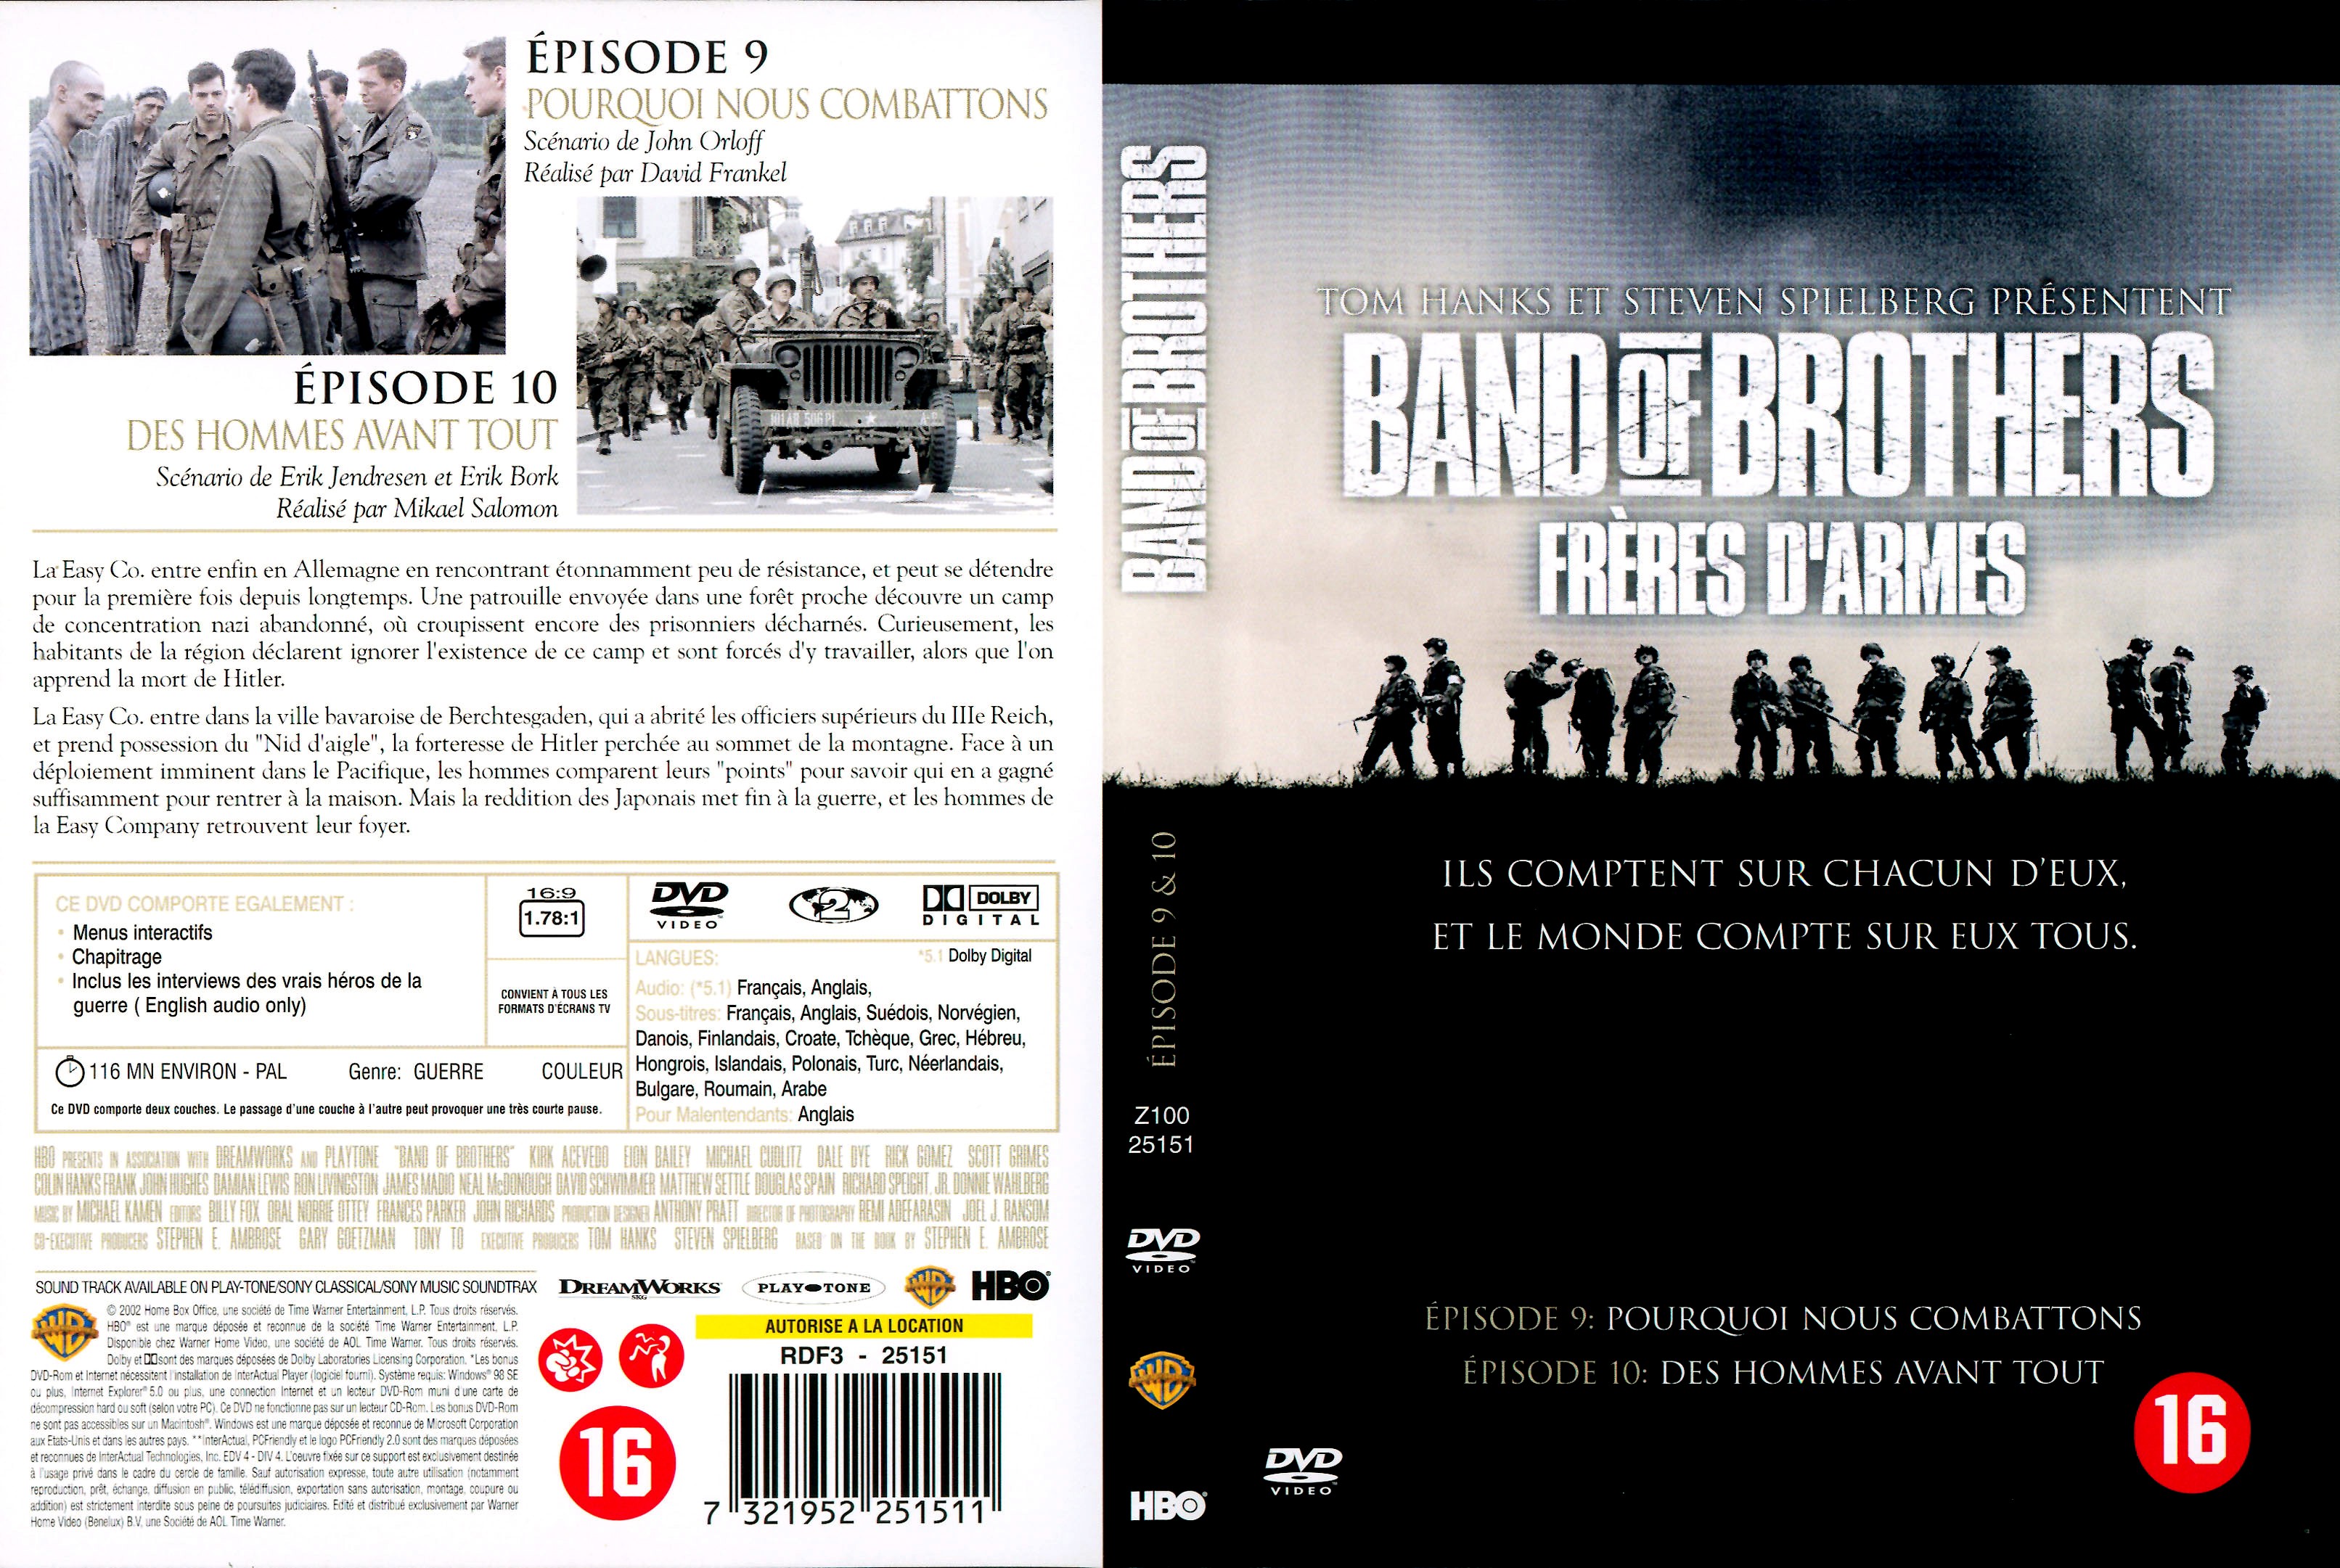 Jaquette DVD Band of brothers vol 5